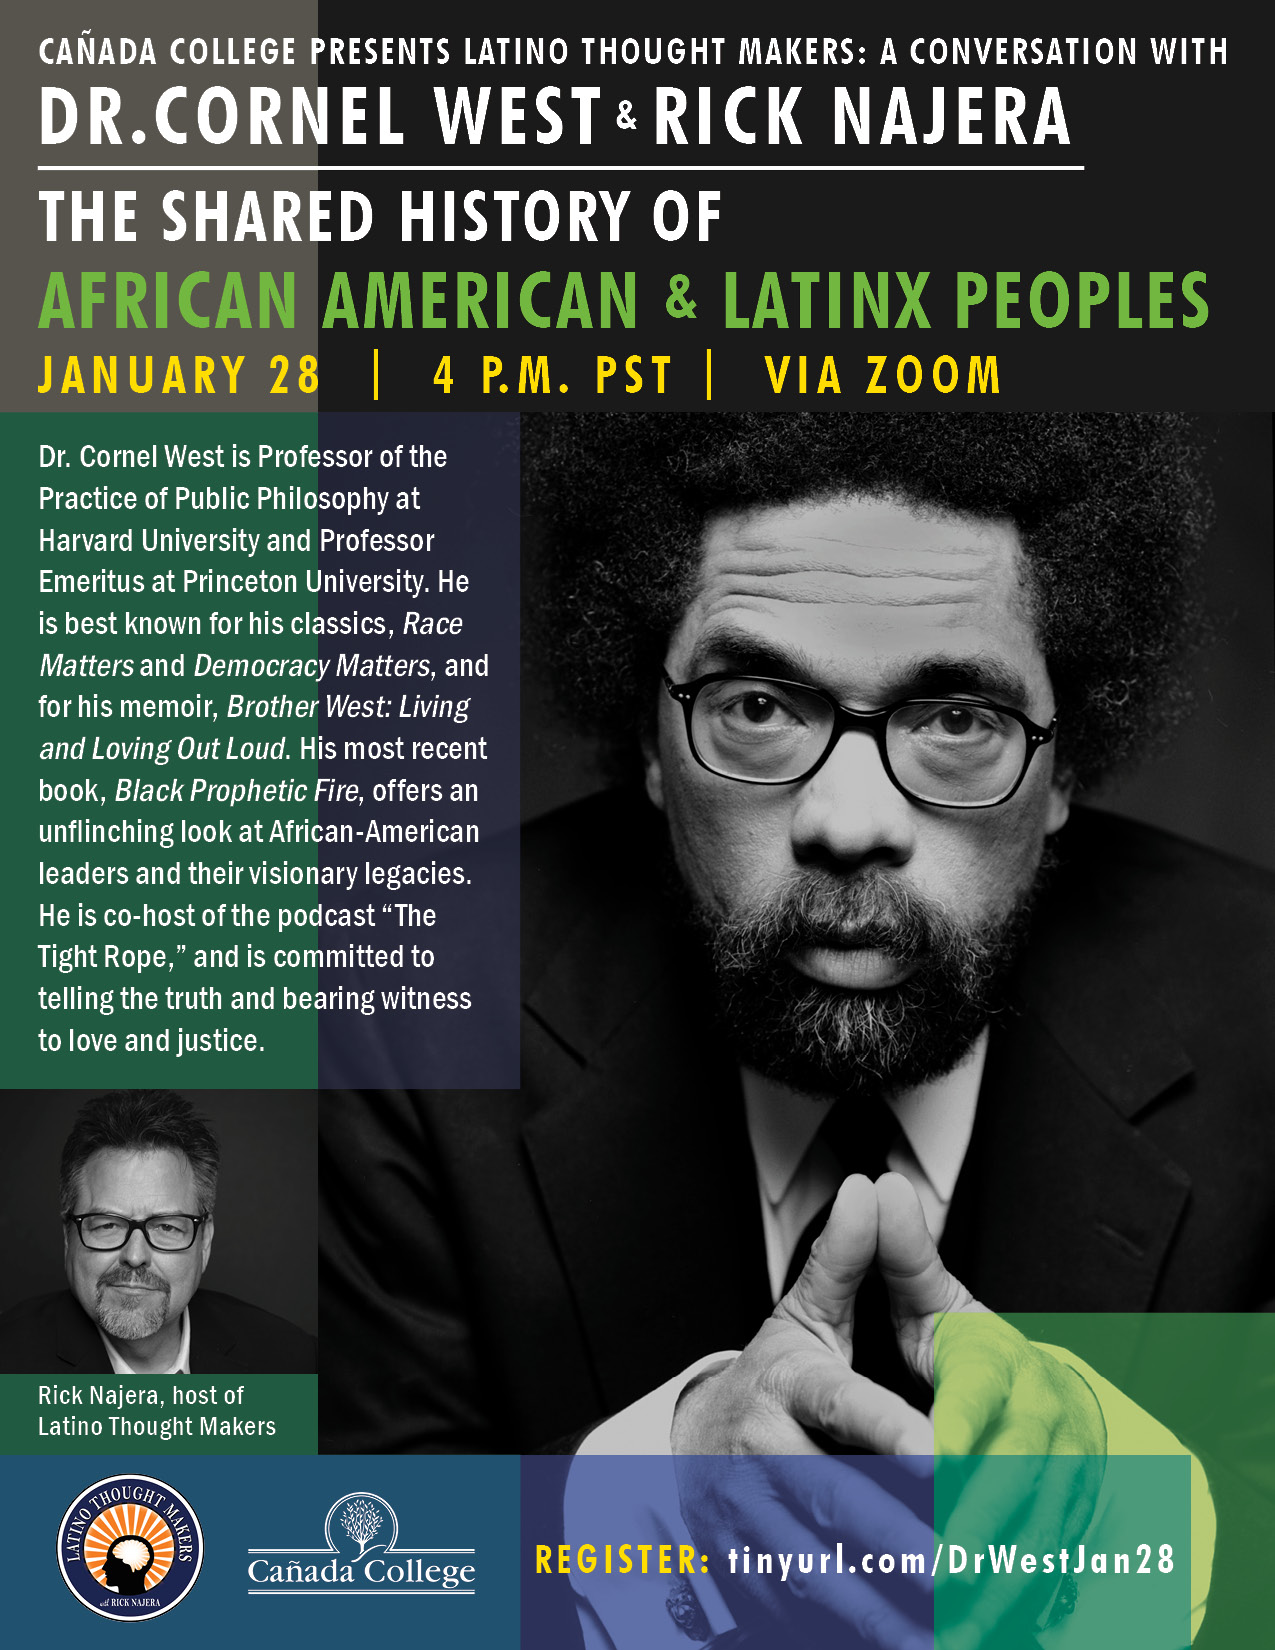 Author and Scholar Dr. Cornel West to Speak at Cañada College on January 28, 2021